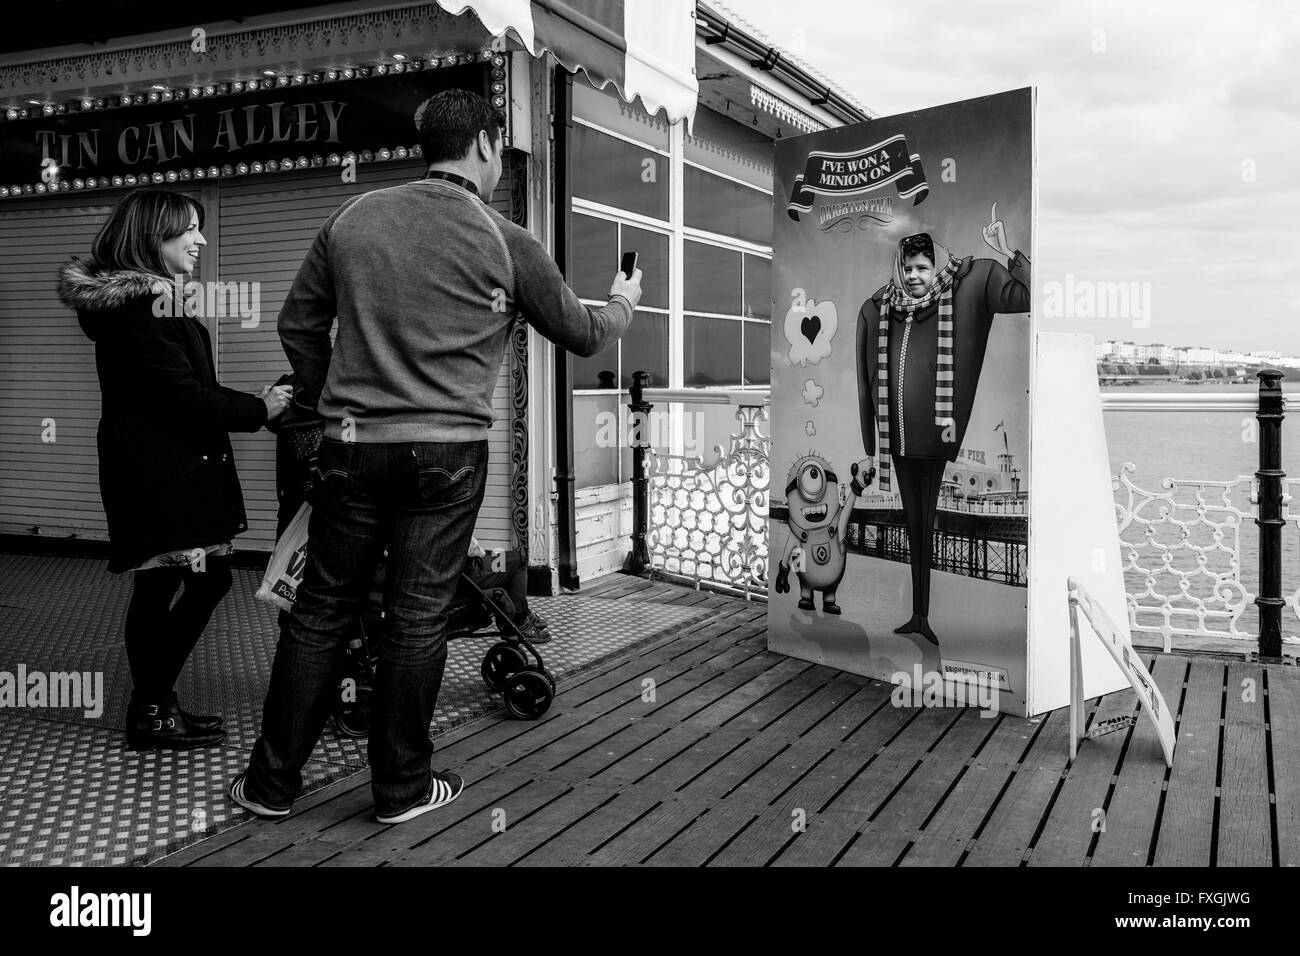 A Family Pose For Photos At One Of The Face Cut Out Photographic Boards, Brighton Pier, Sussex, UK Stock Photo